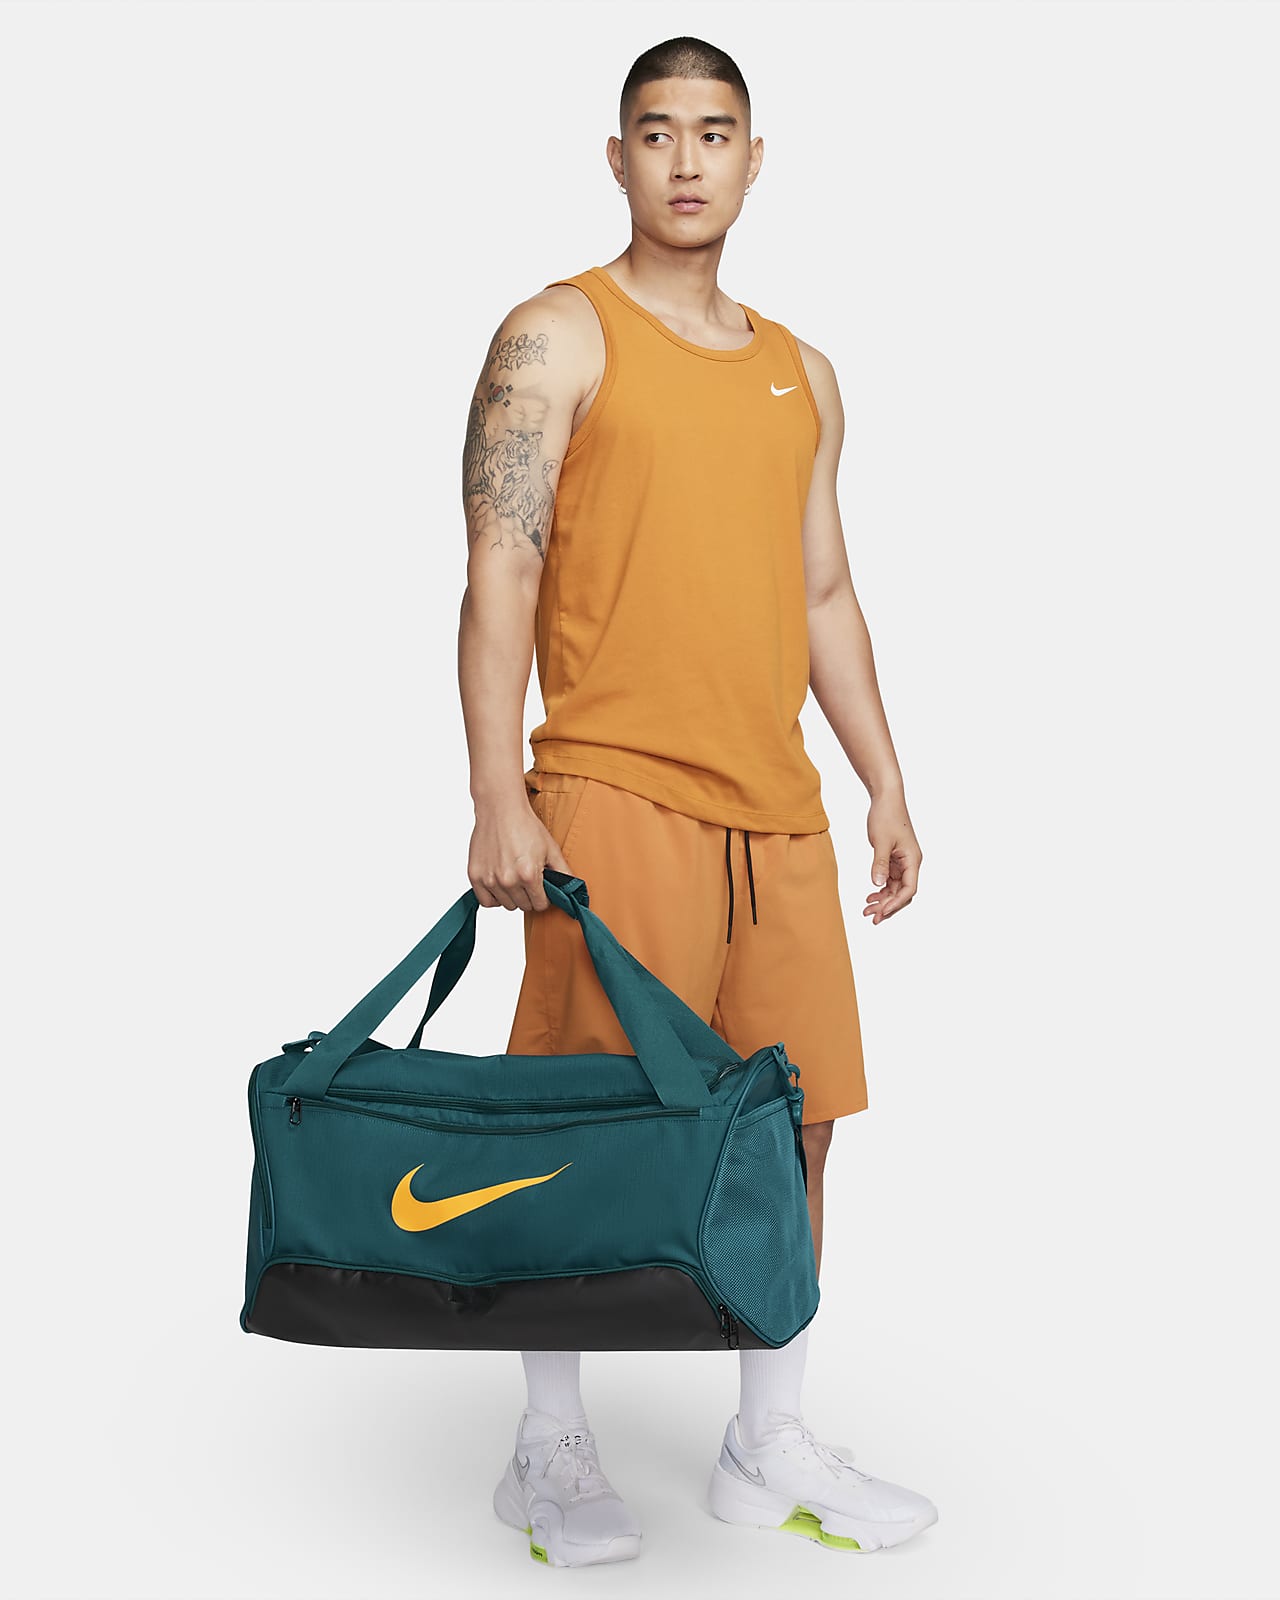 Nike Brasilia training convertible Duffel Bag/Backpack, Sports Equipment,  Other Sports Equipment and Supplies on Carousell